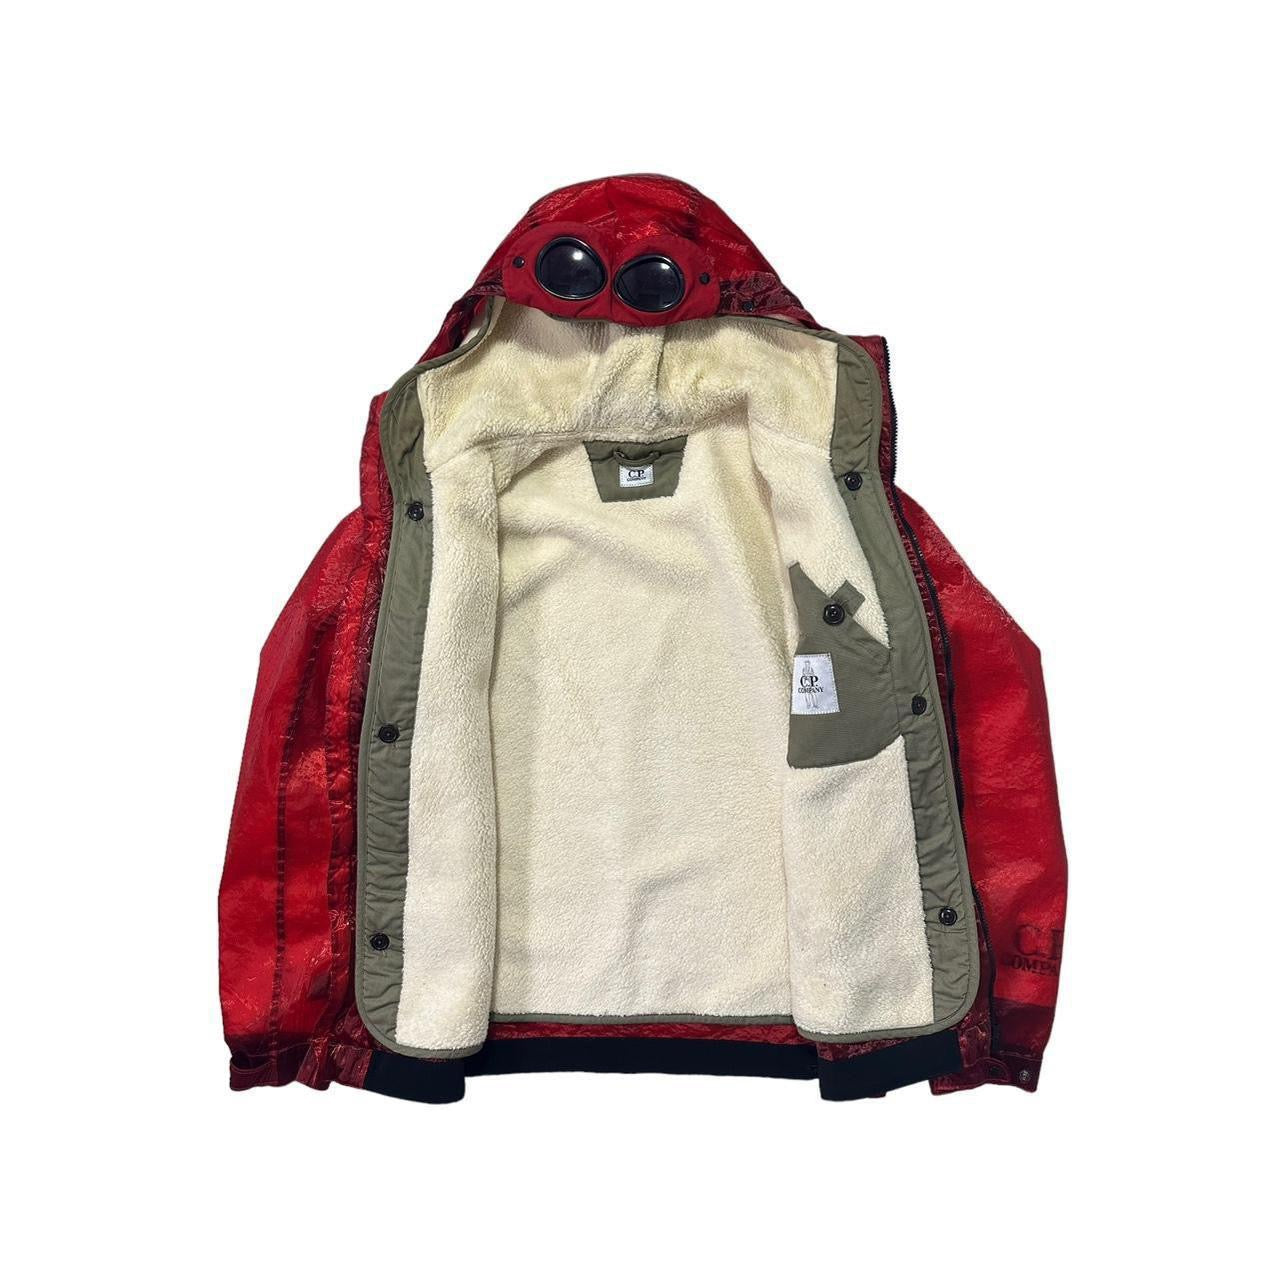 CP Company Kan D Zip Up Jacket with Sheep Skin Inner